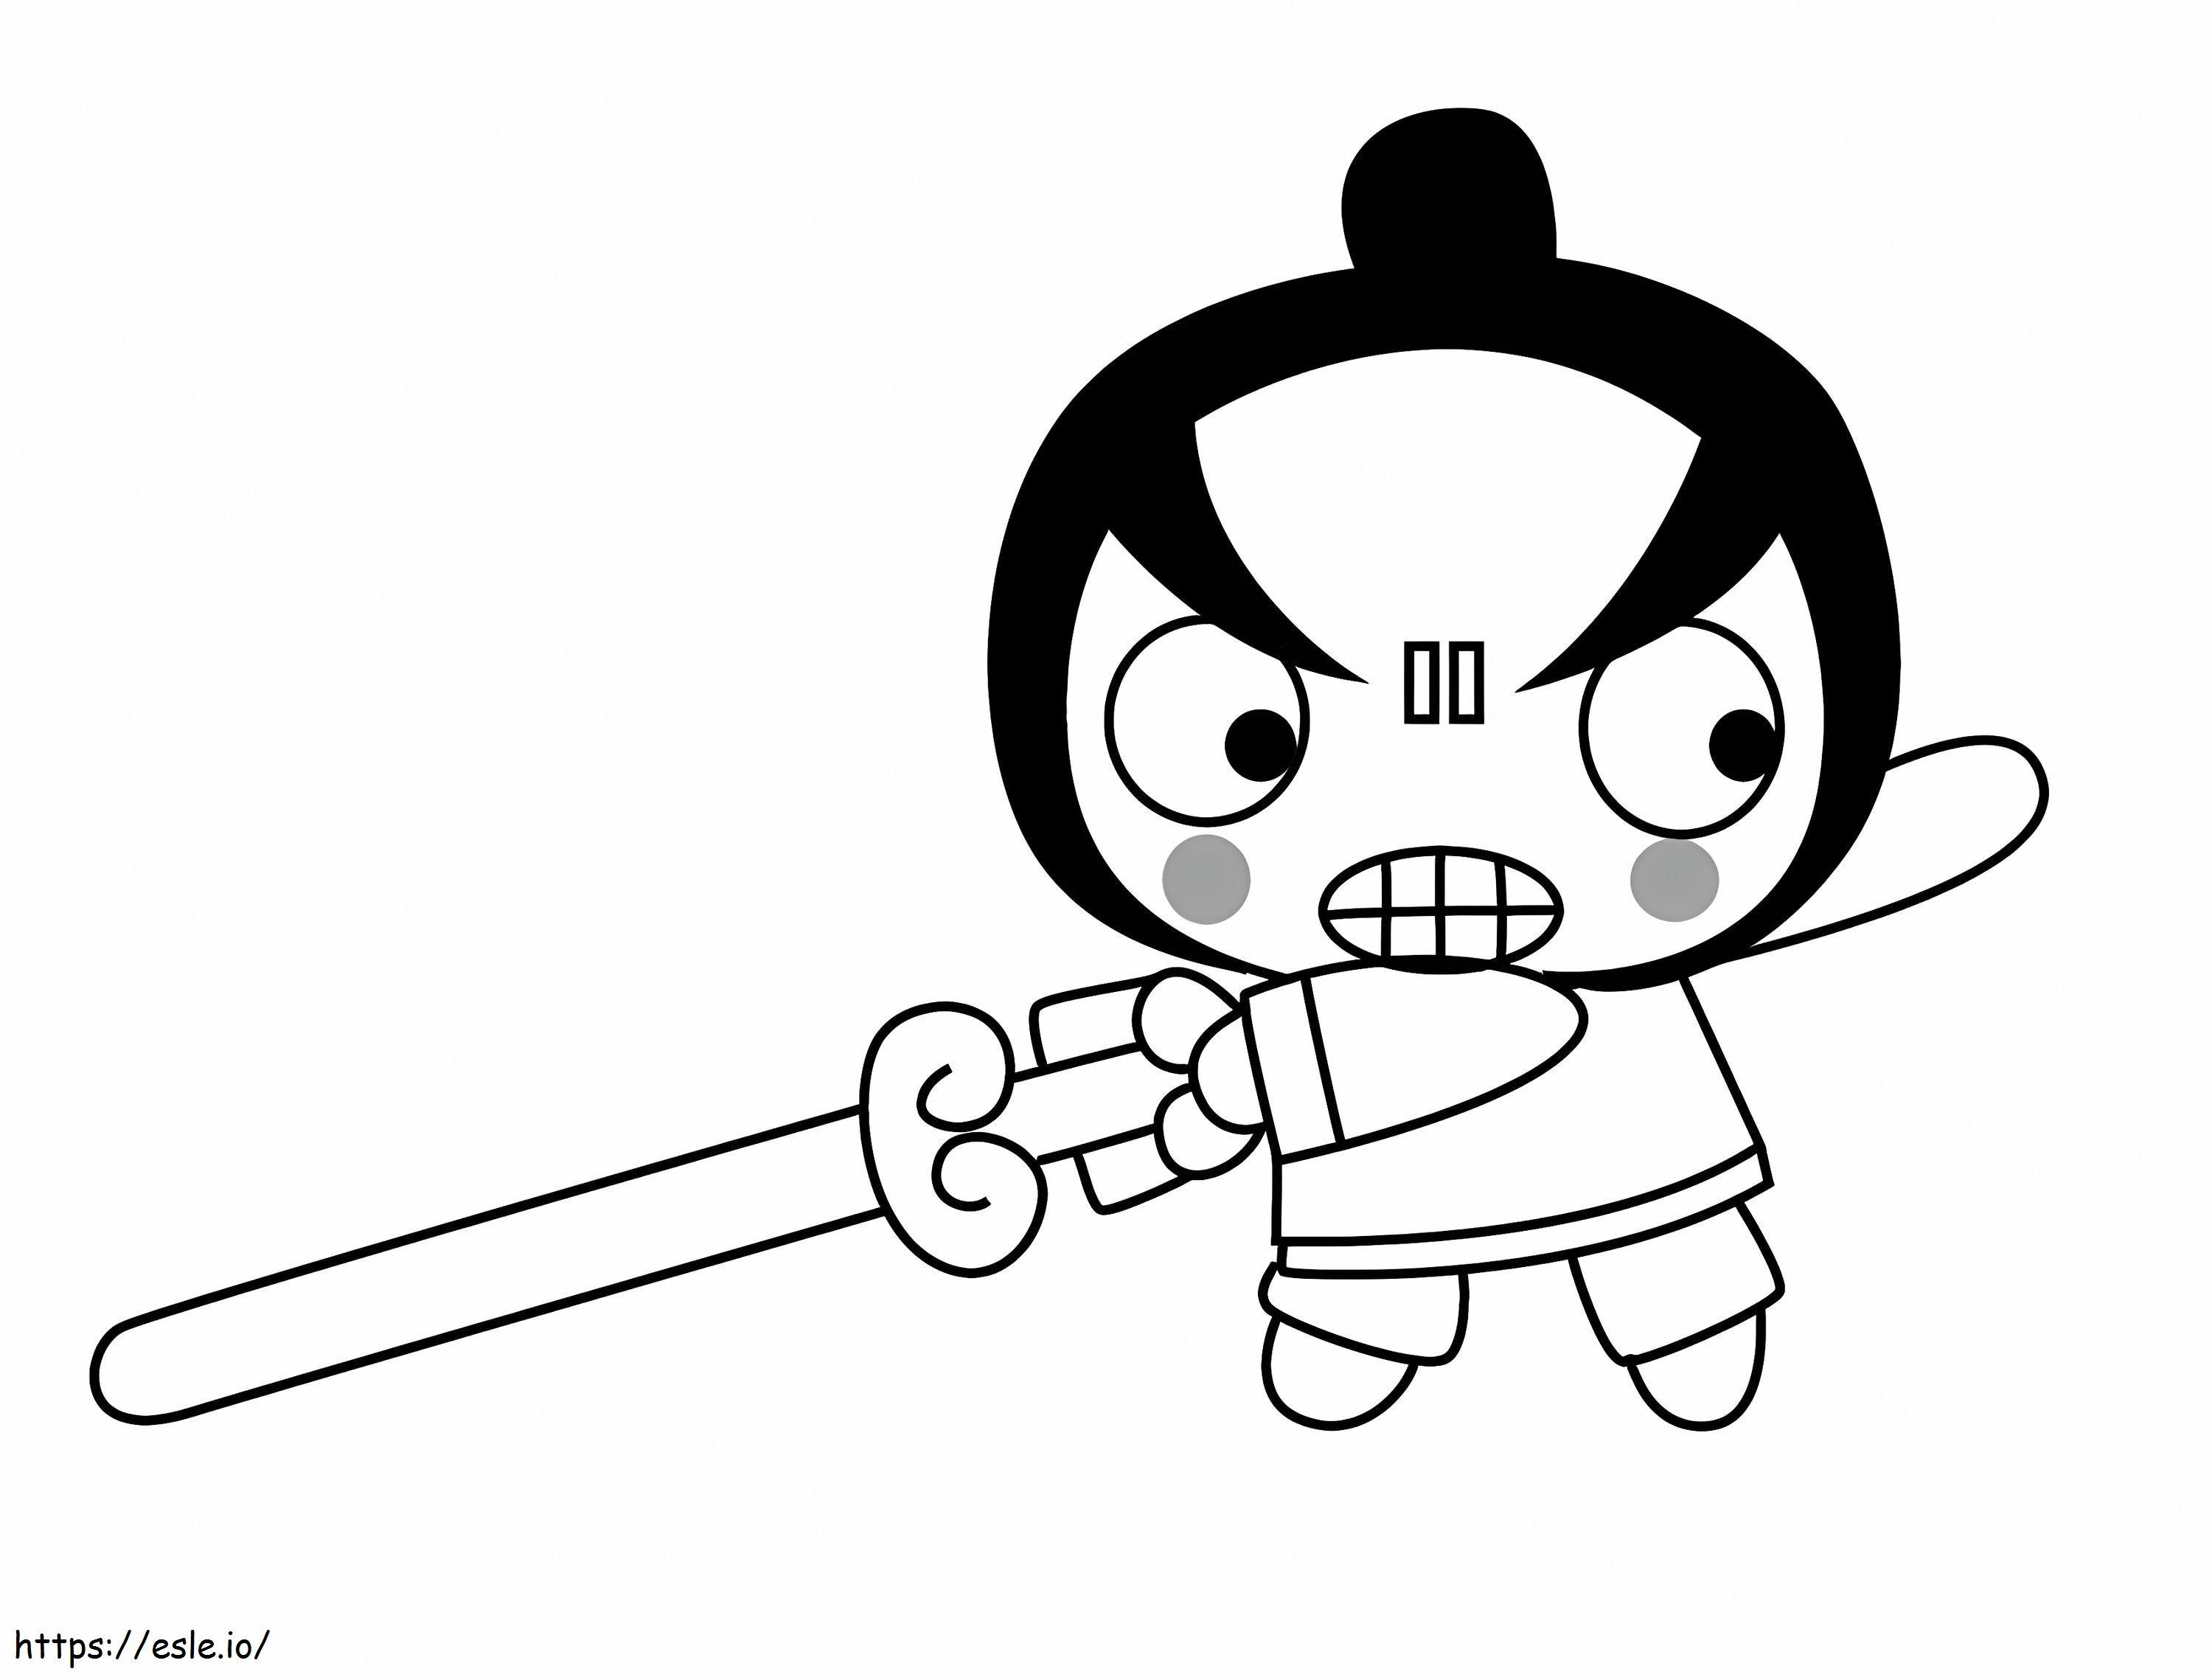 1596499723 How To Draw Chang From Pucca Step 0 coloring page